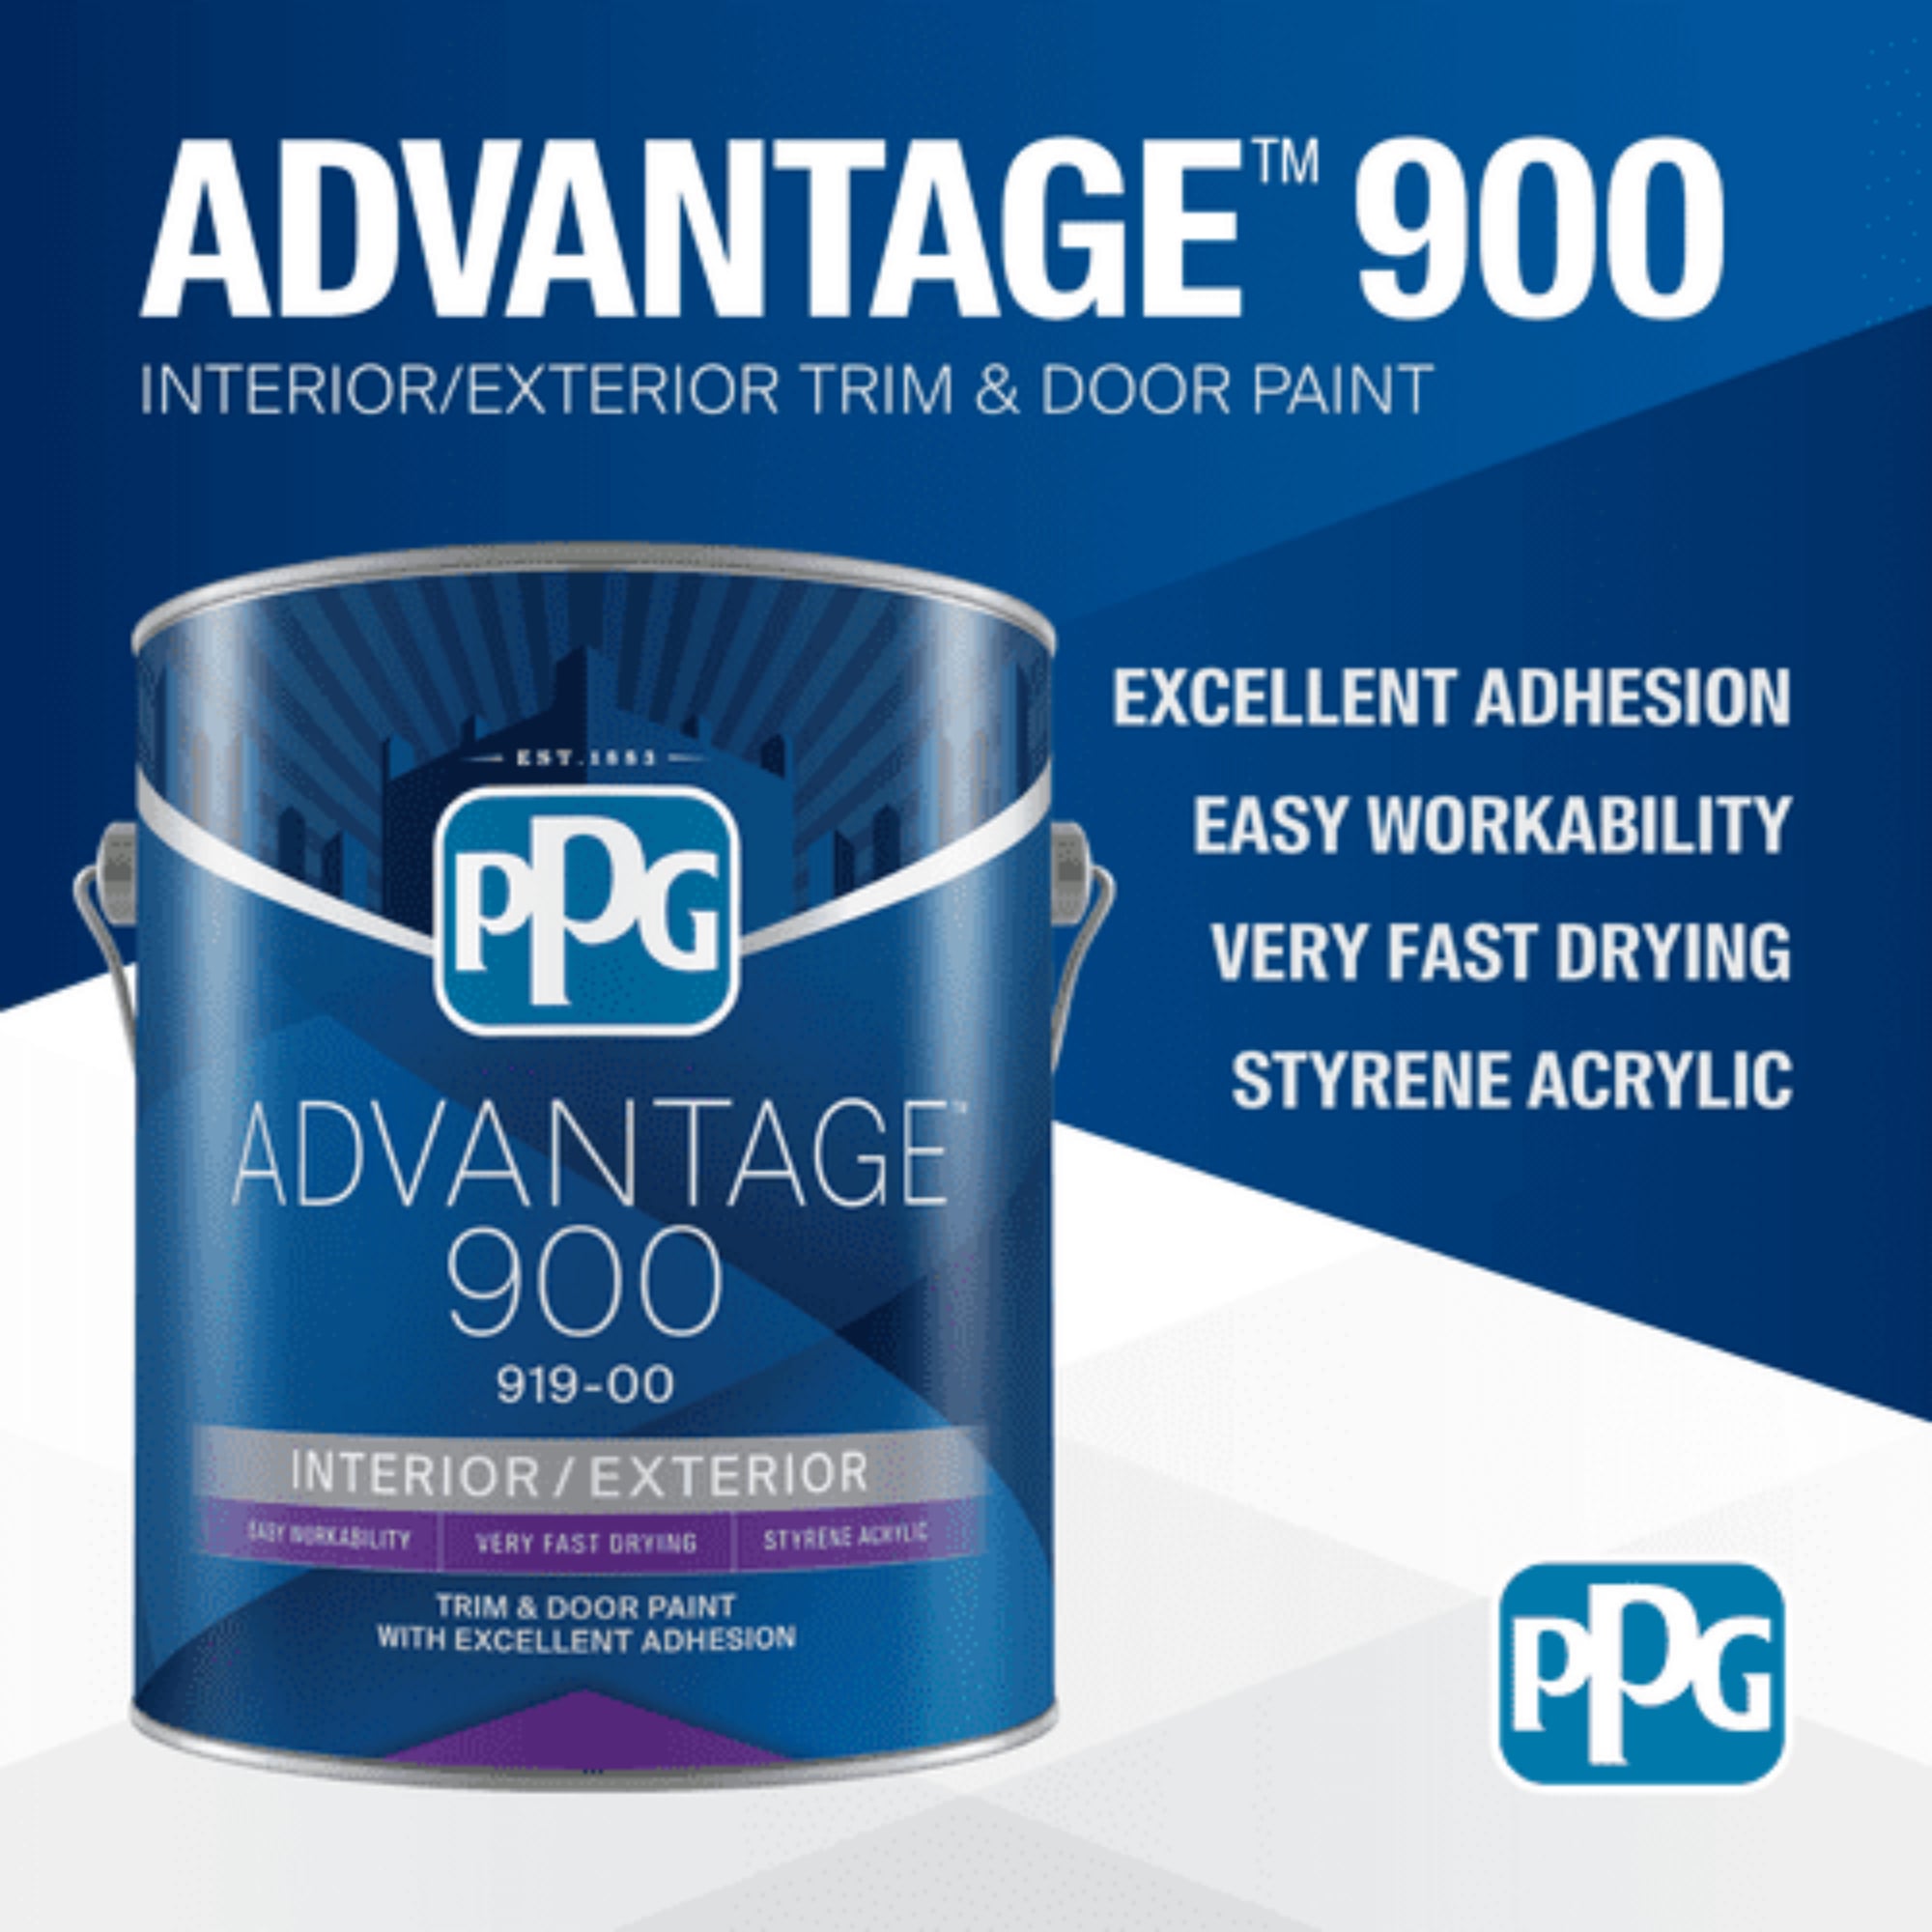 ppg paint manager orange county